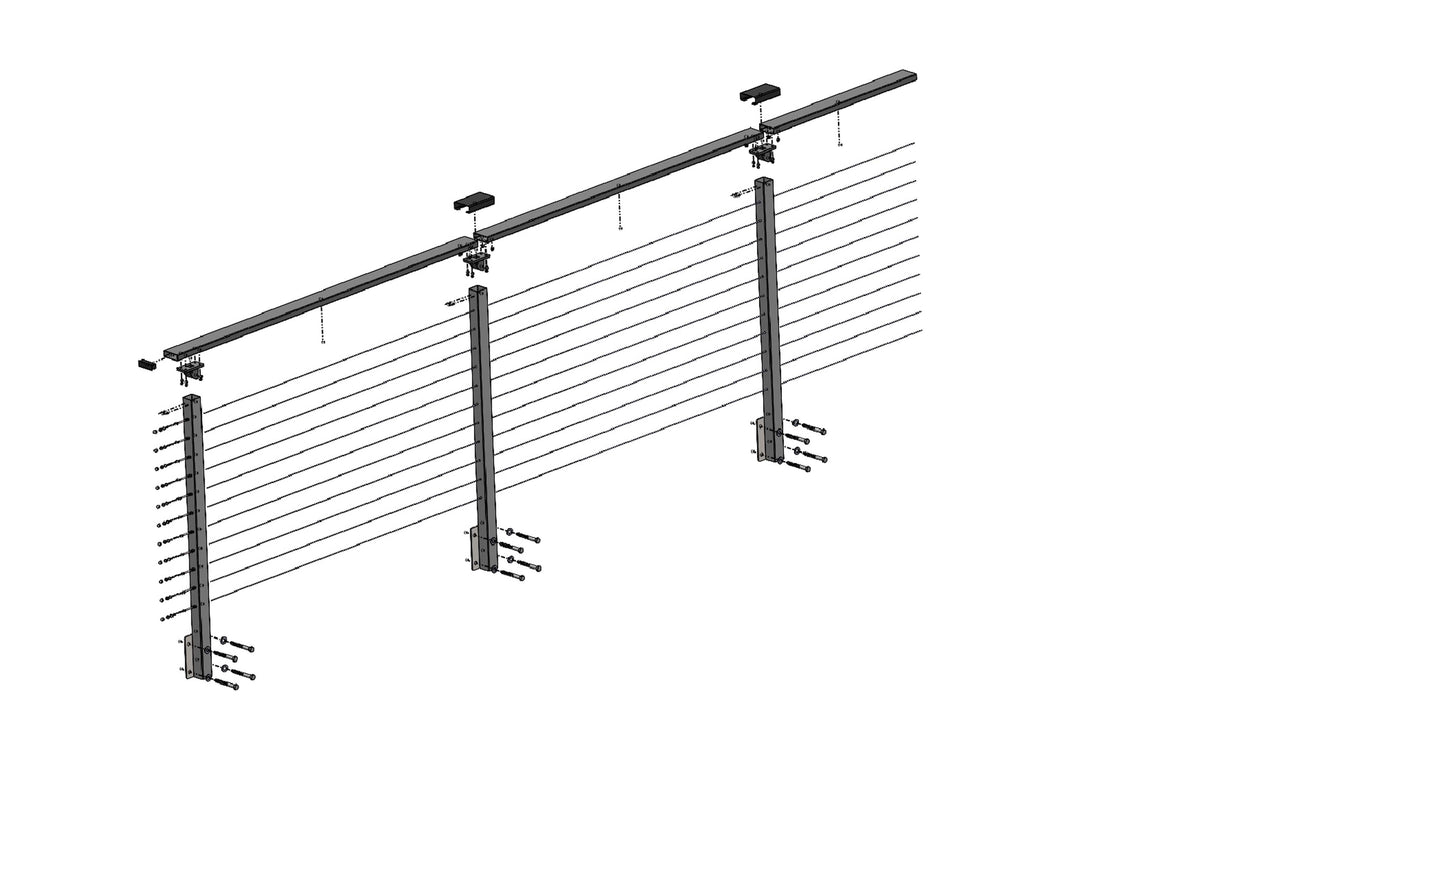 62 ft. x 36 in. Bronze Deck Cable Railing, Face Mount